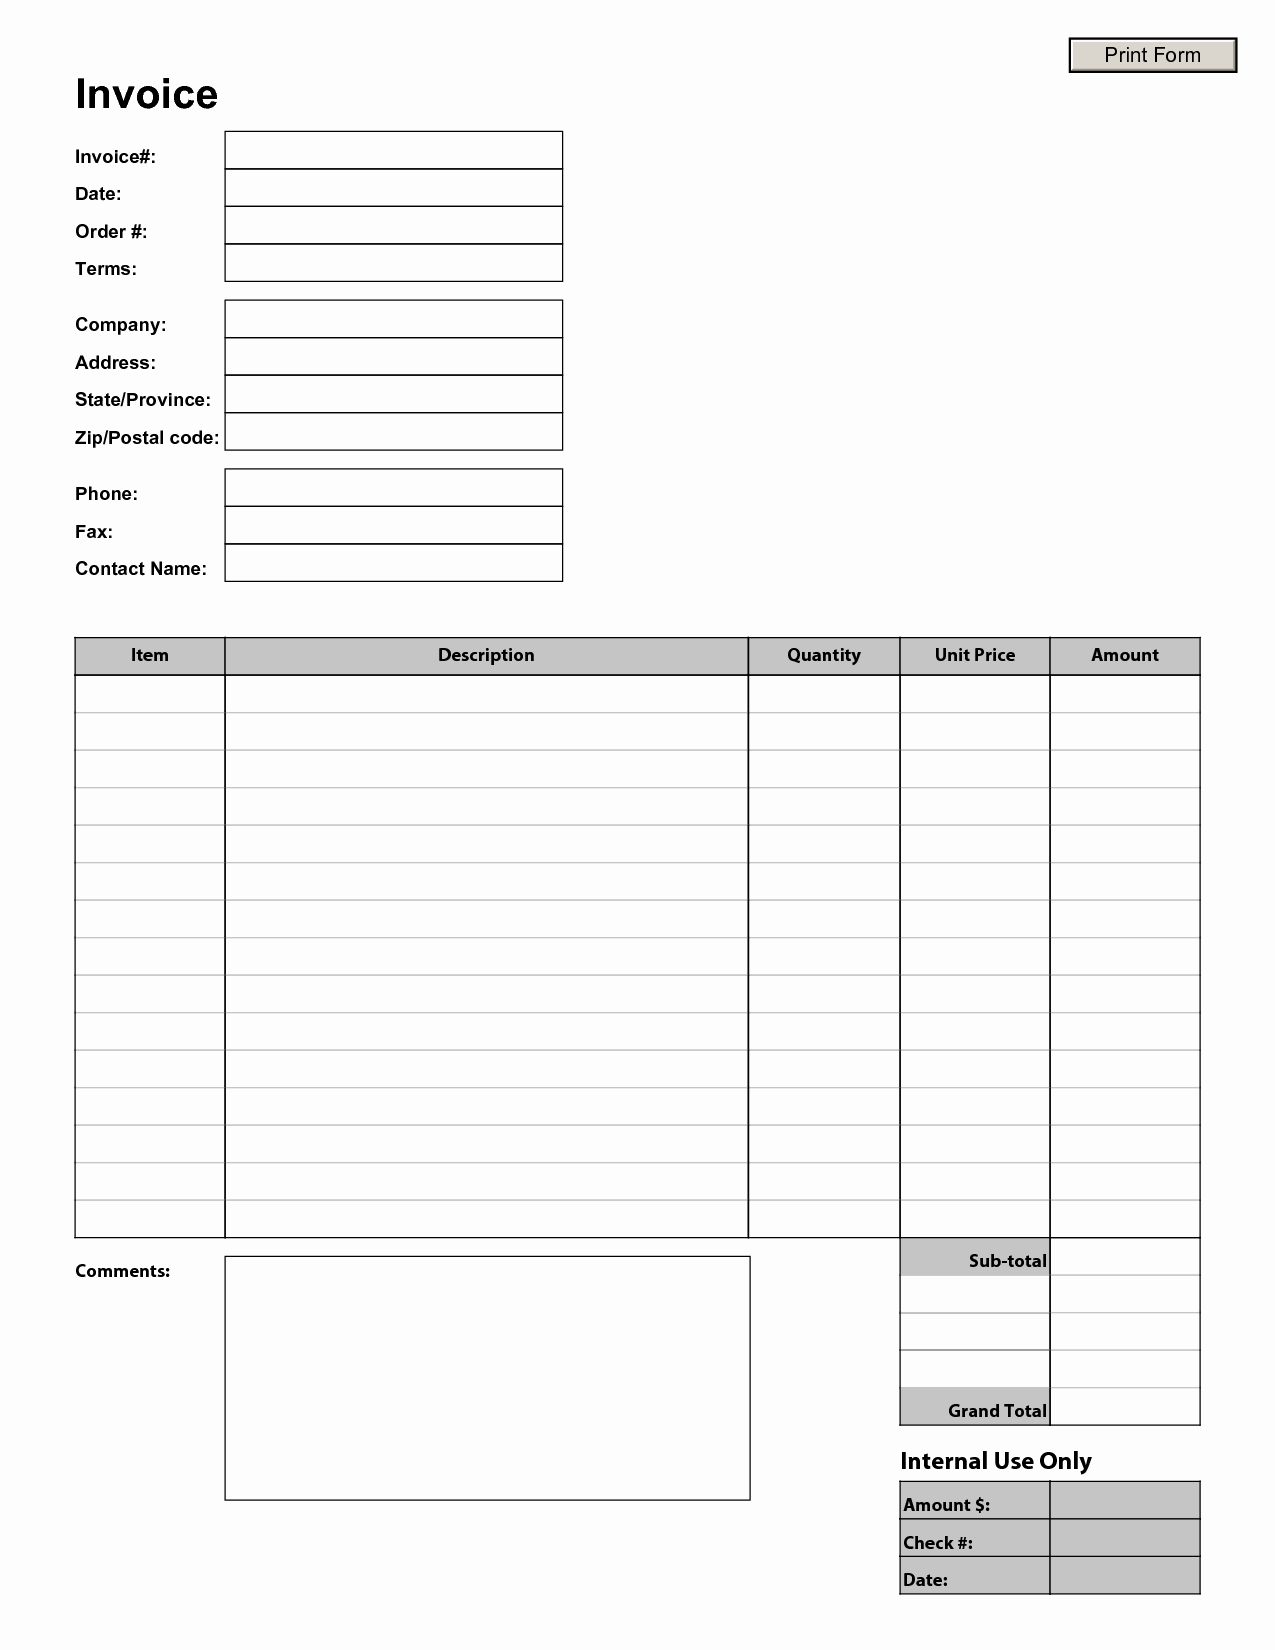 Blank Invoice Template Free Lovely Blank Invoice Template Blank Invoice